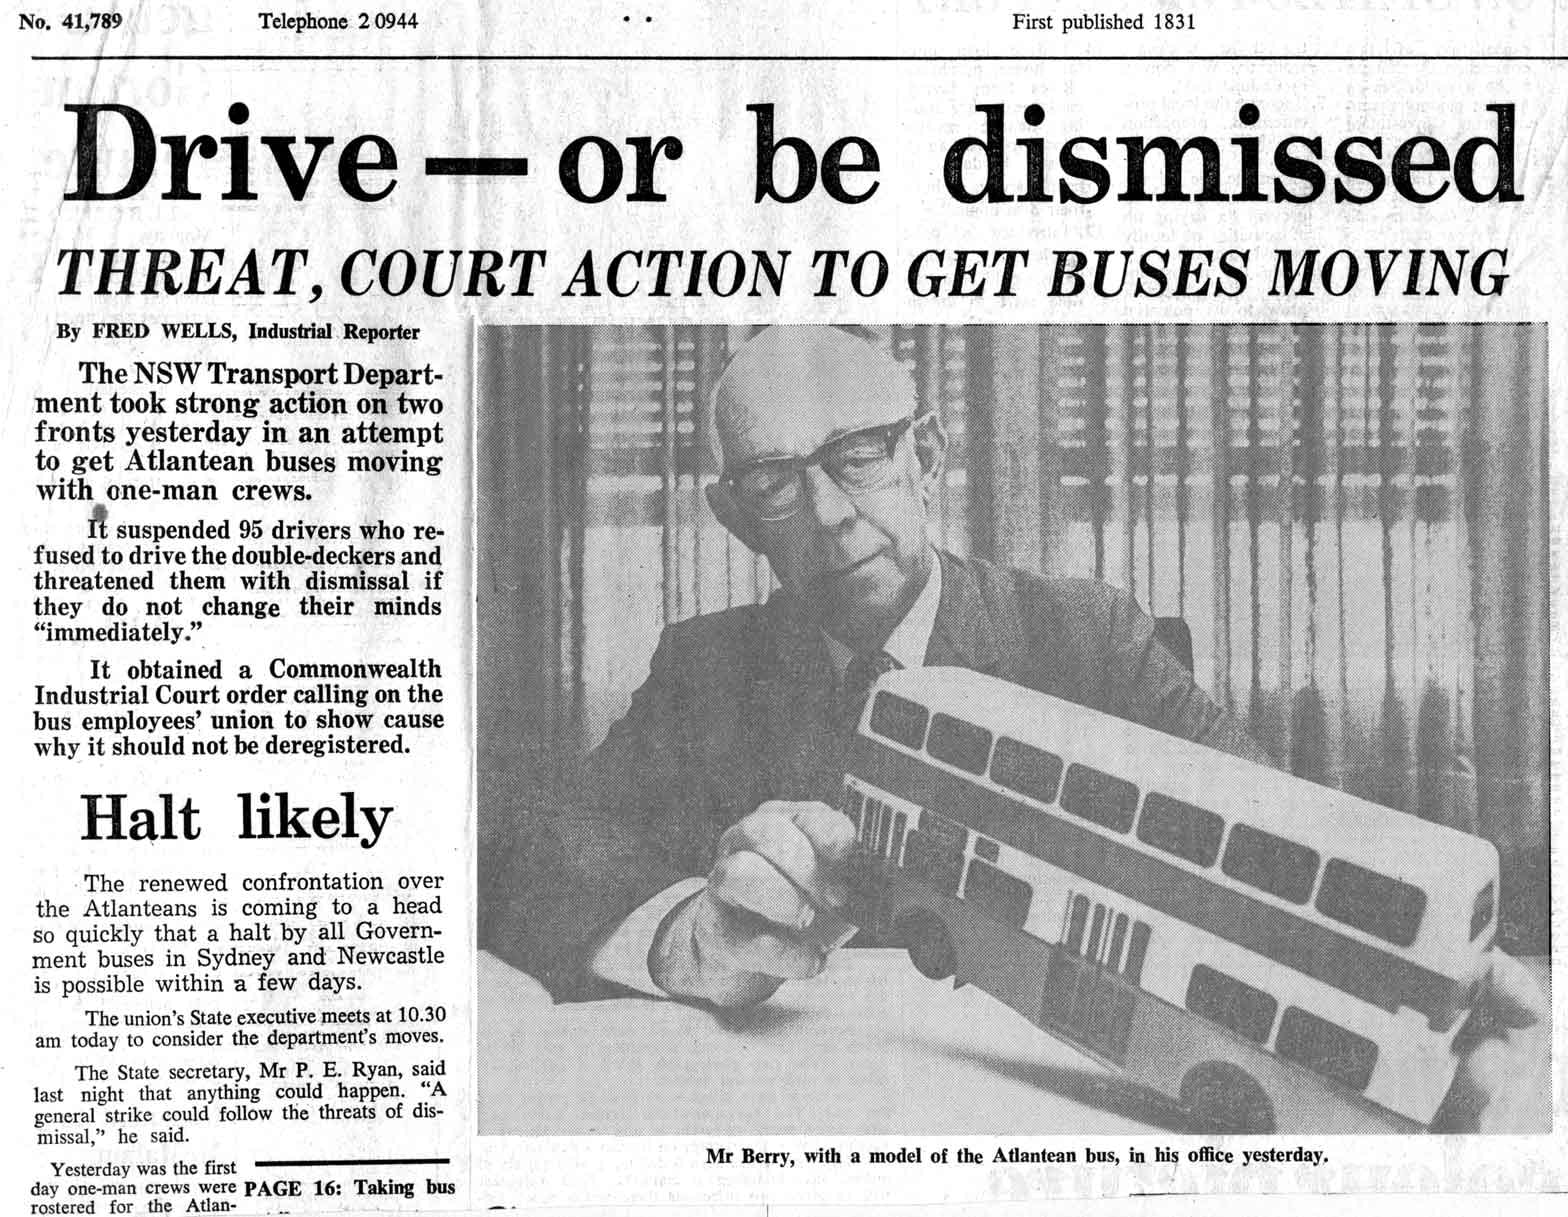 SMH article - Drive or be dismissed - 23 Nov 1971